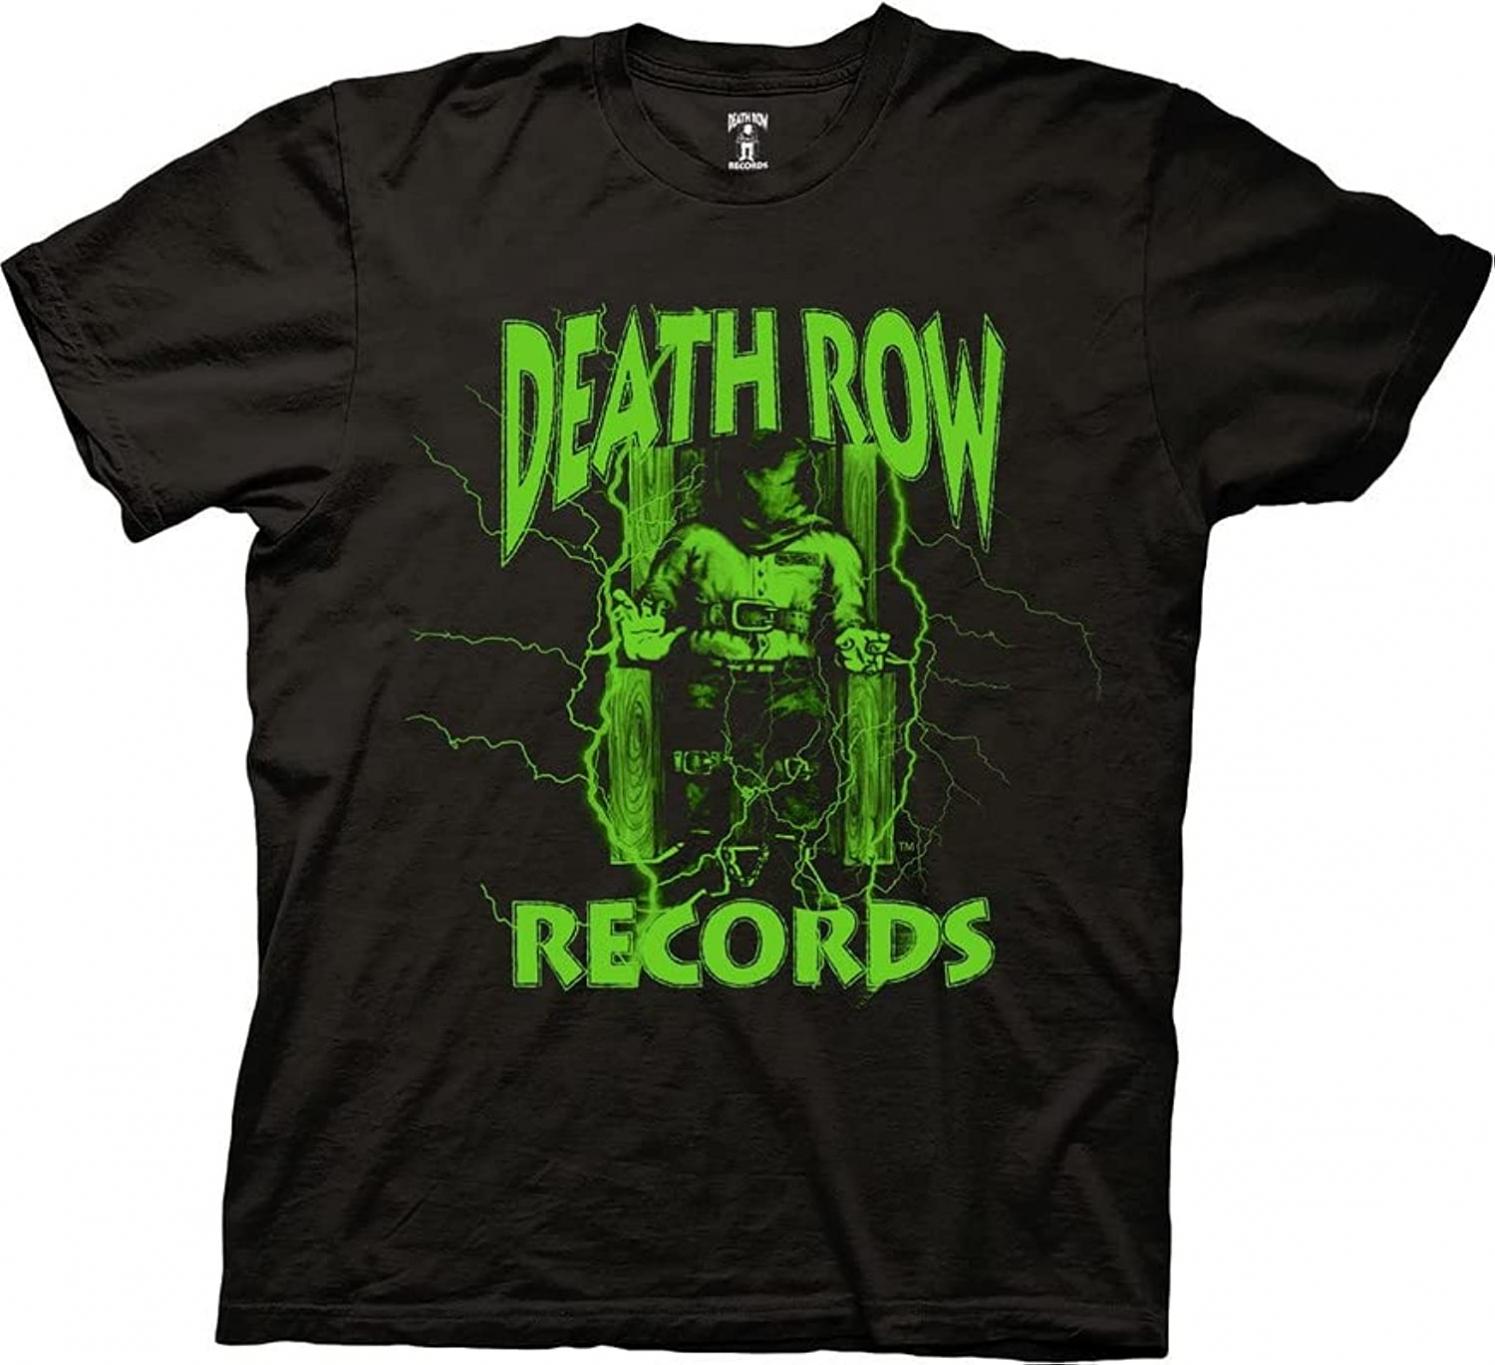 Ripple Junction Death Row Records Neon Green Electric Crew T-Shirt